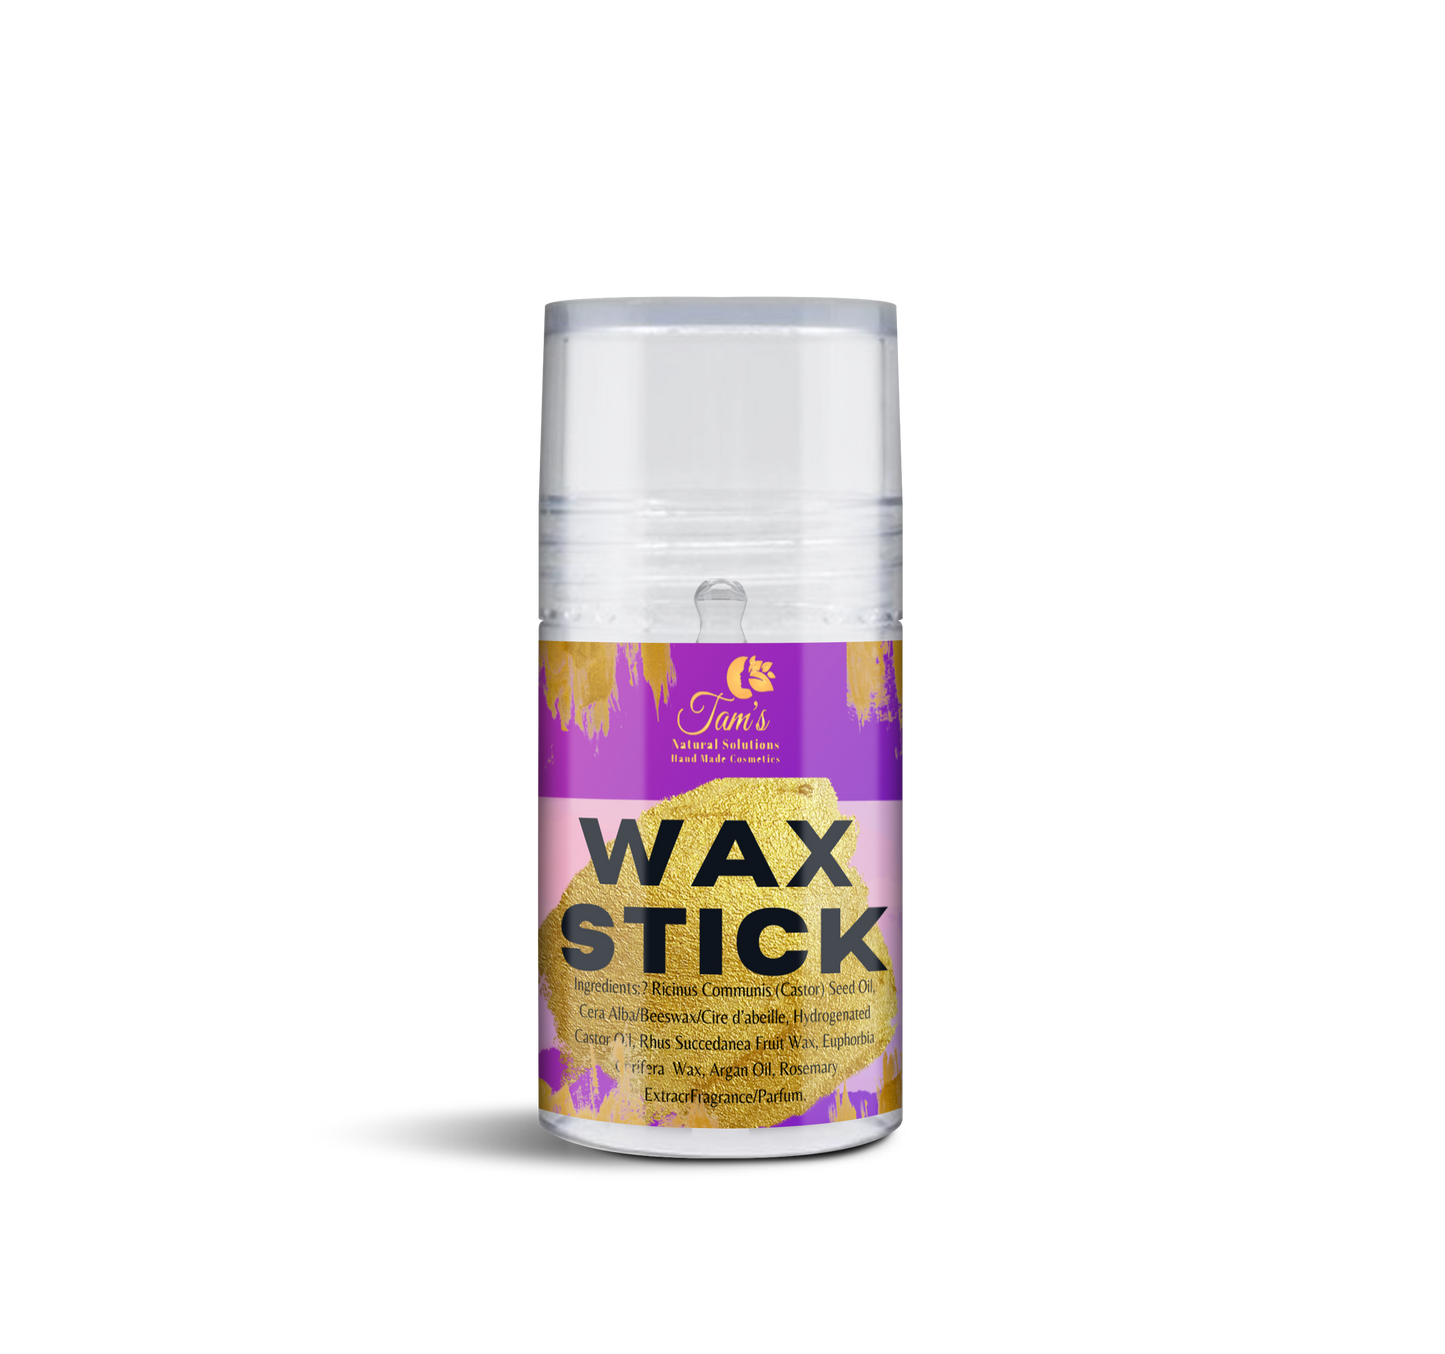 Wax Stick for Styling 2.5 oz - Tam's Natural Solutions